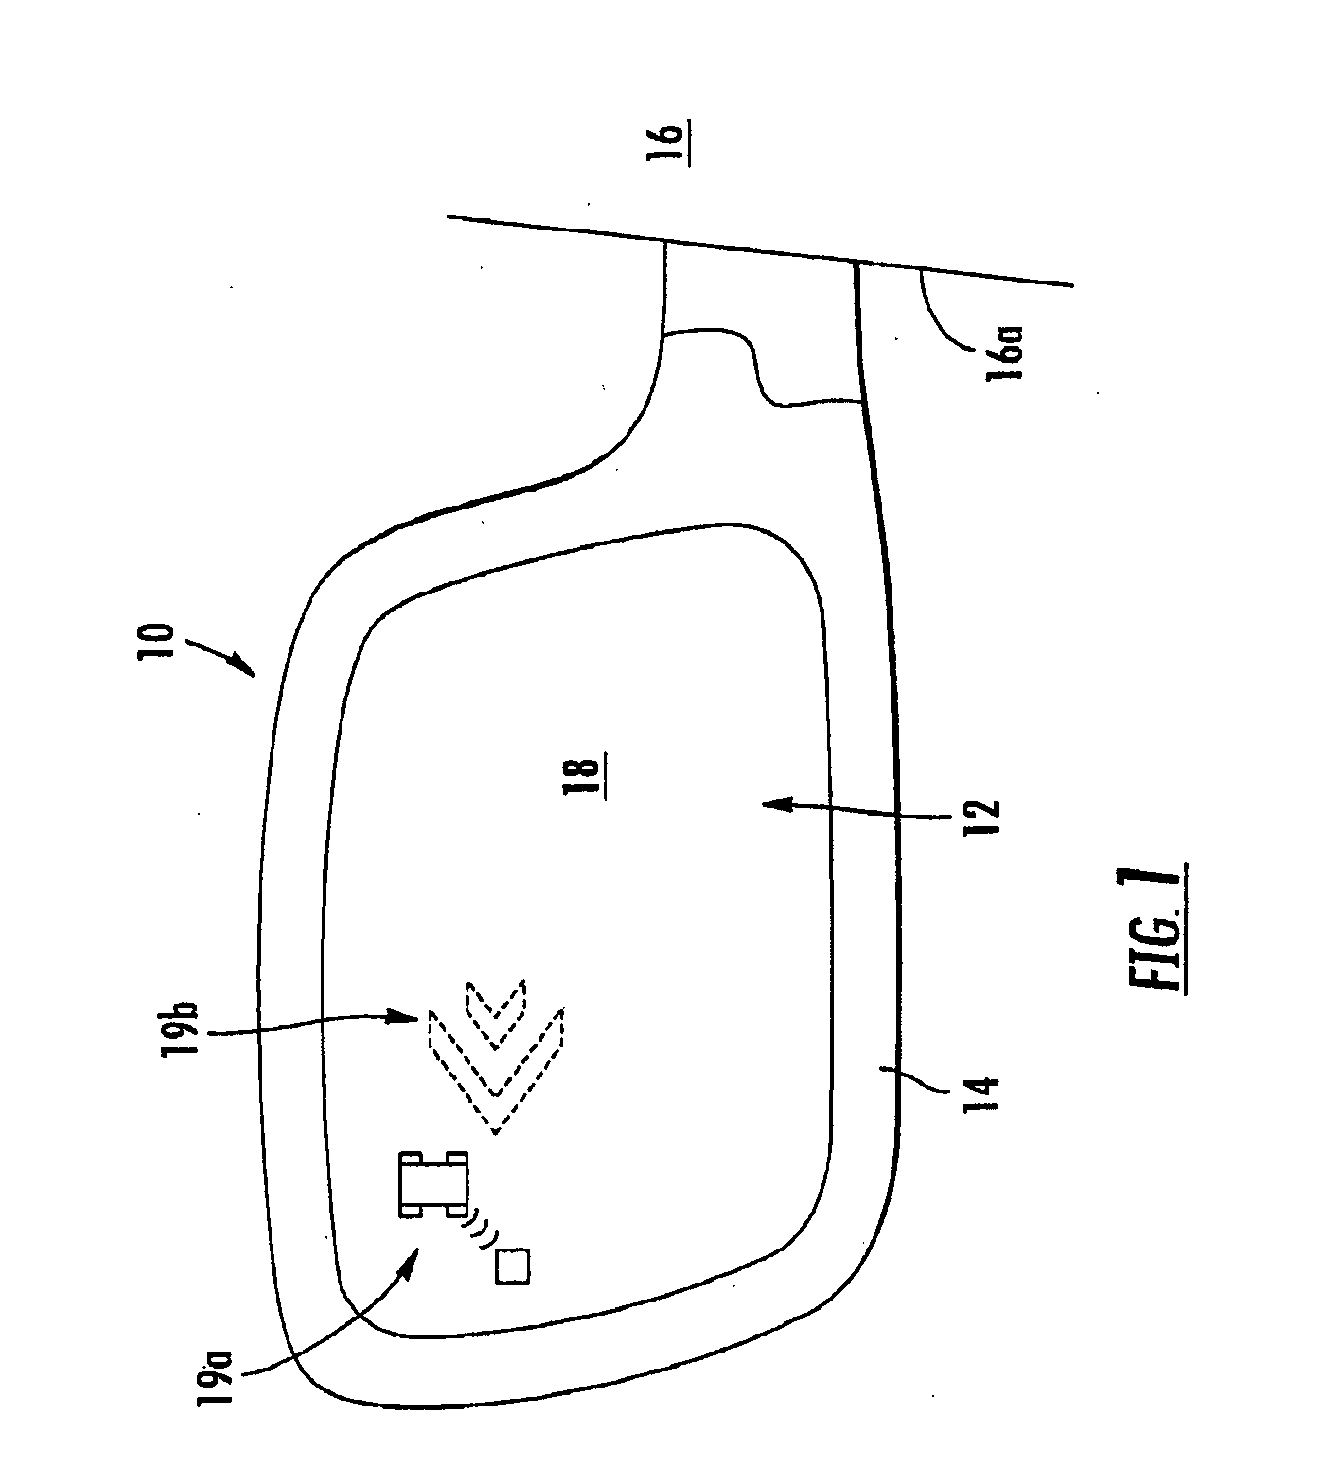 Display device for exterior mirror